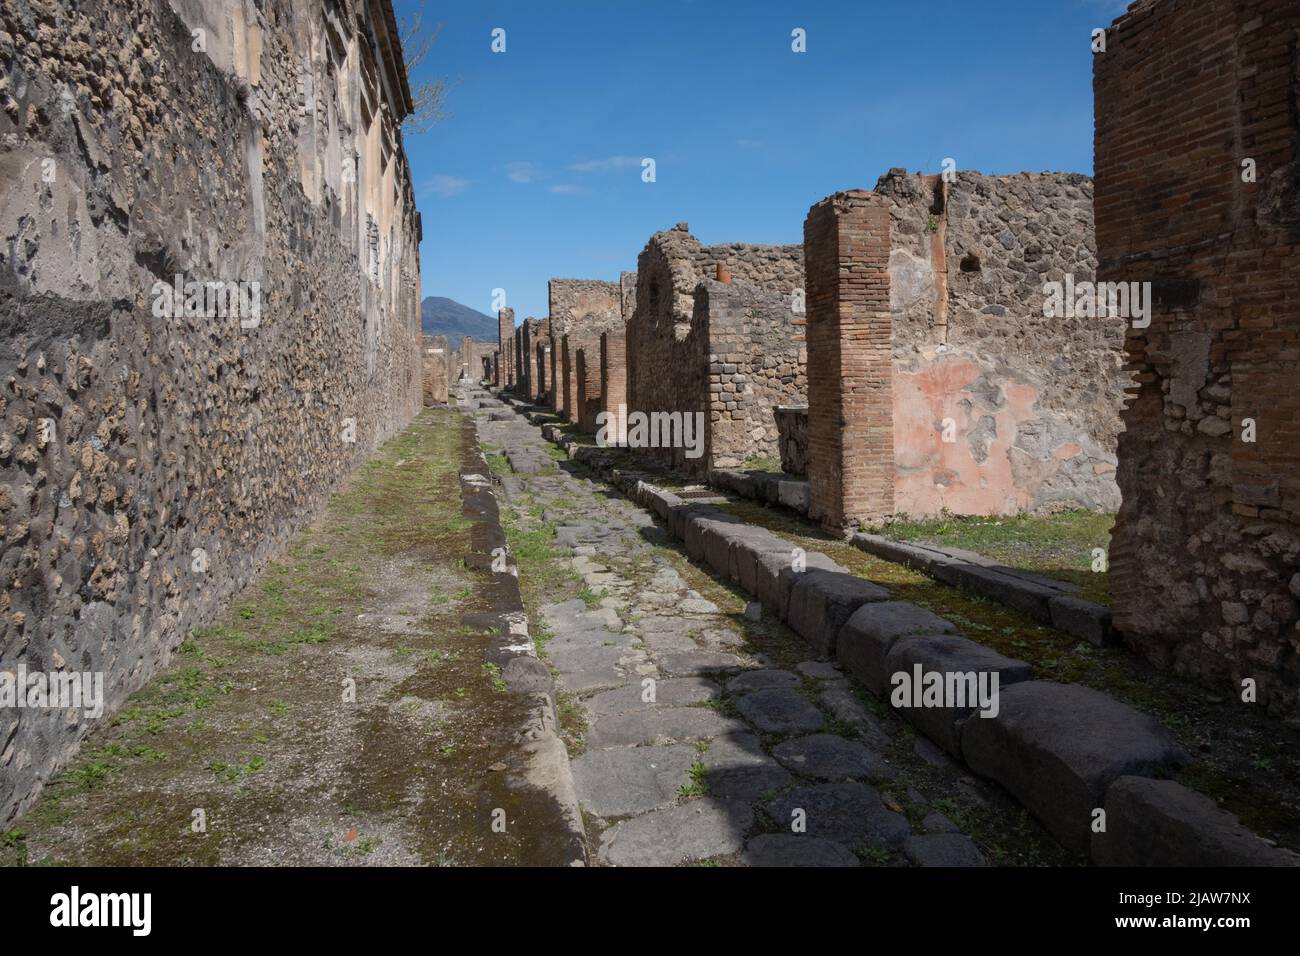 Street with walls of ruined houses in Pompeii, Italy Stock Photo